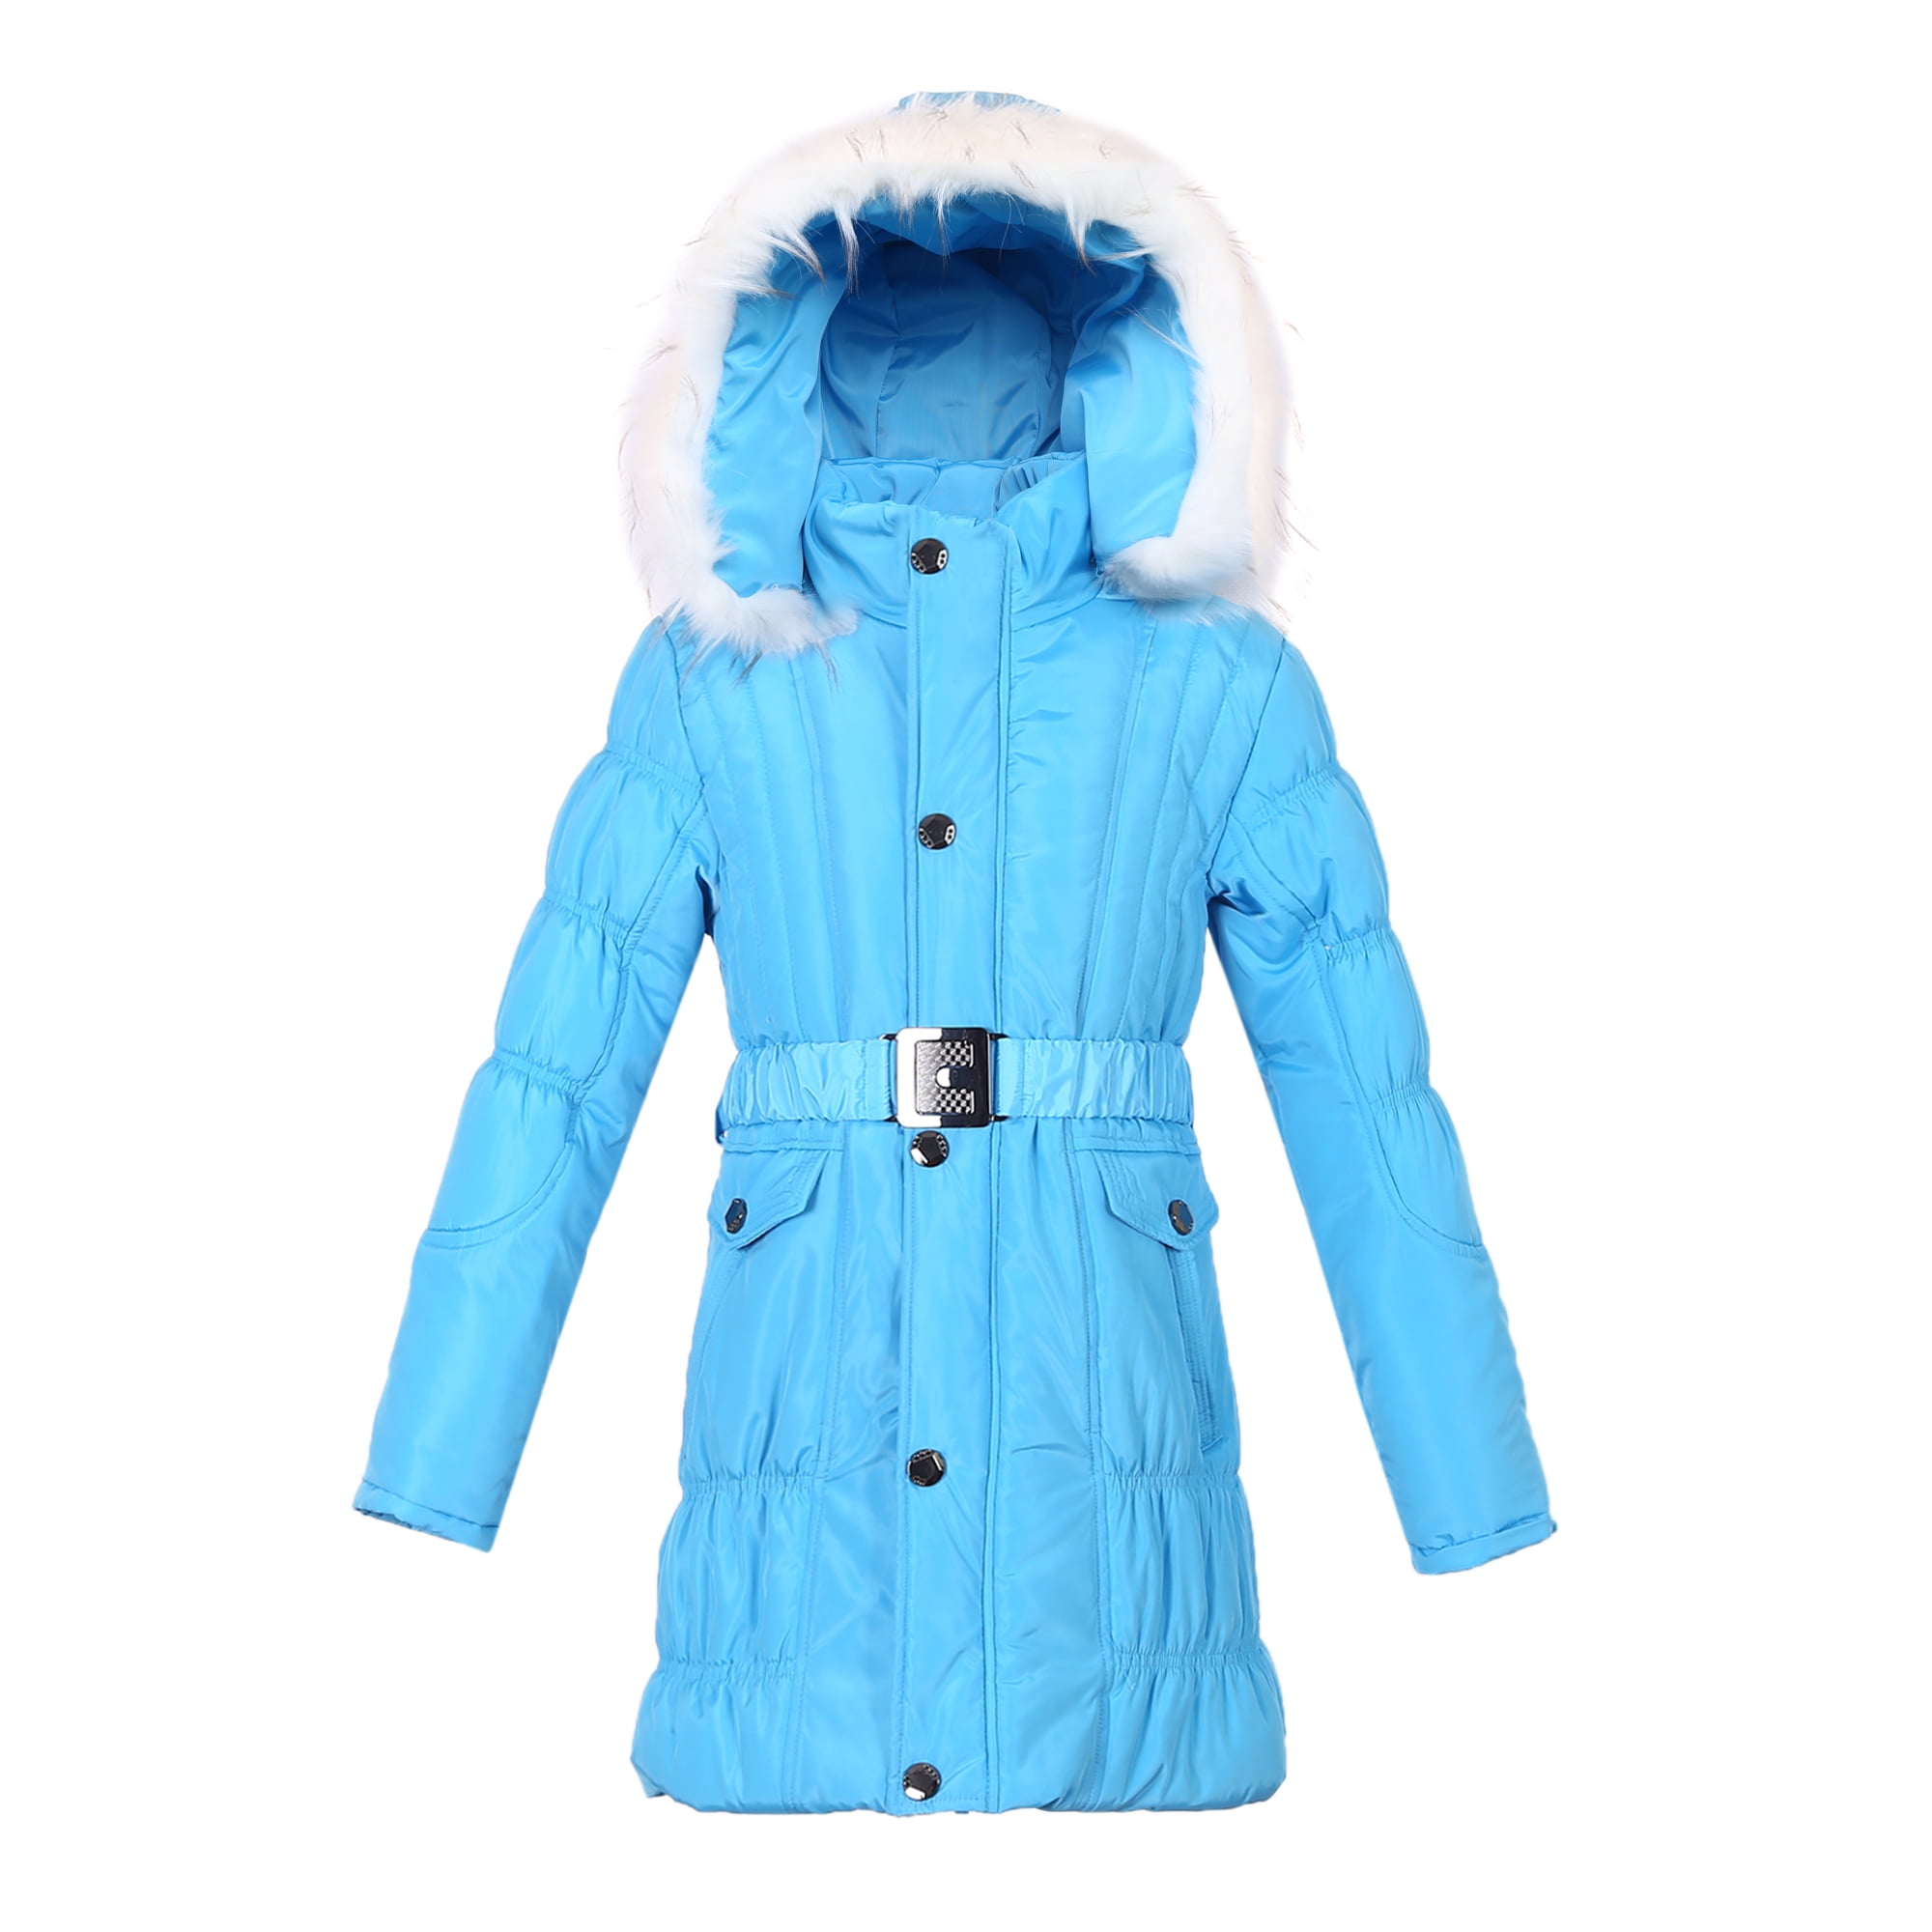 Sweatwater Girls Puffer Thick Hooded Bubble Coat Zip-Front Warm Jacket 